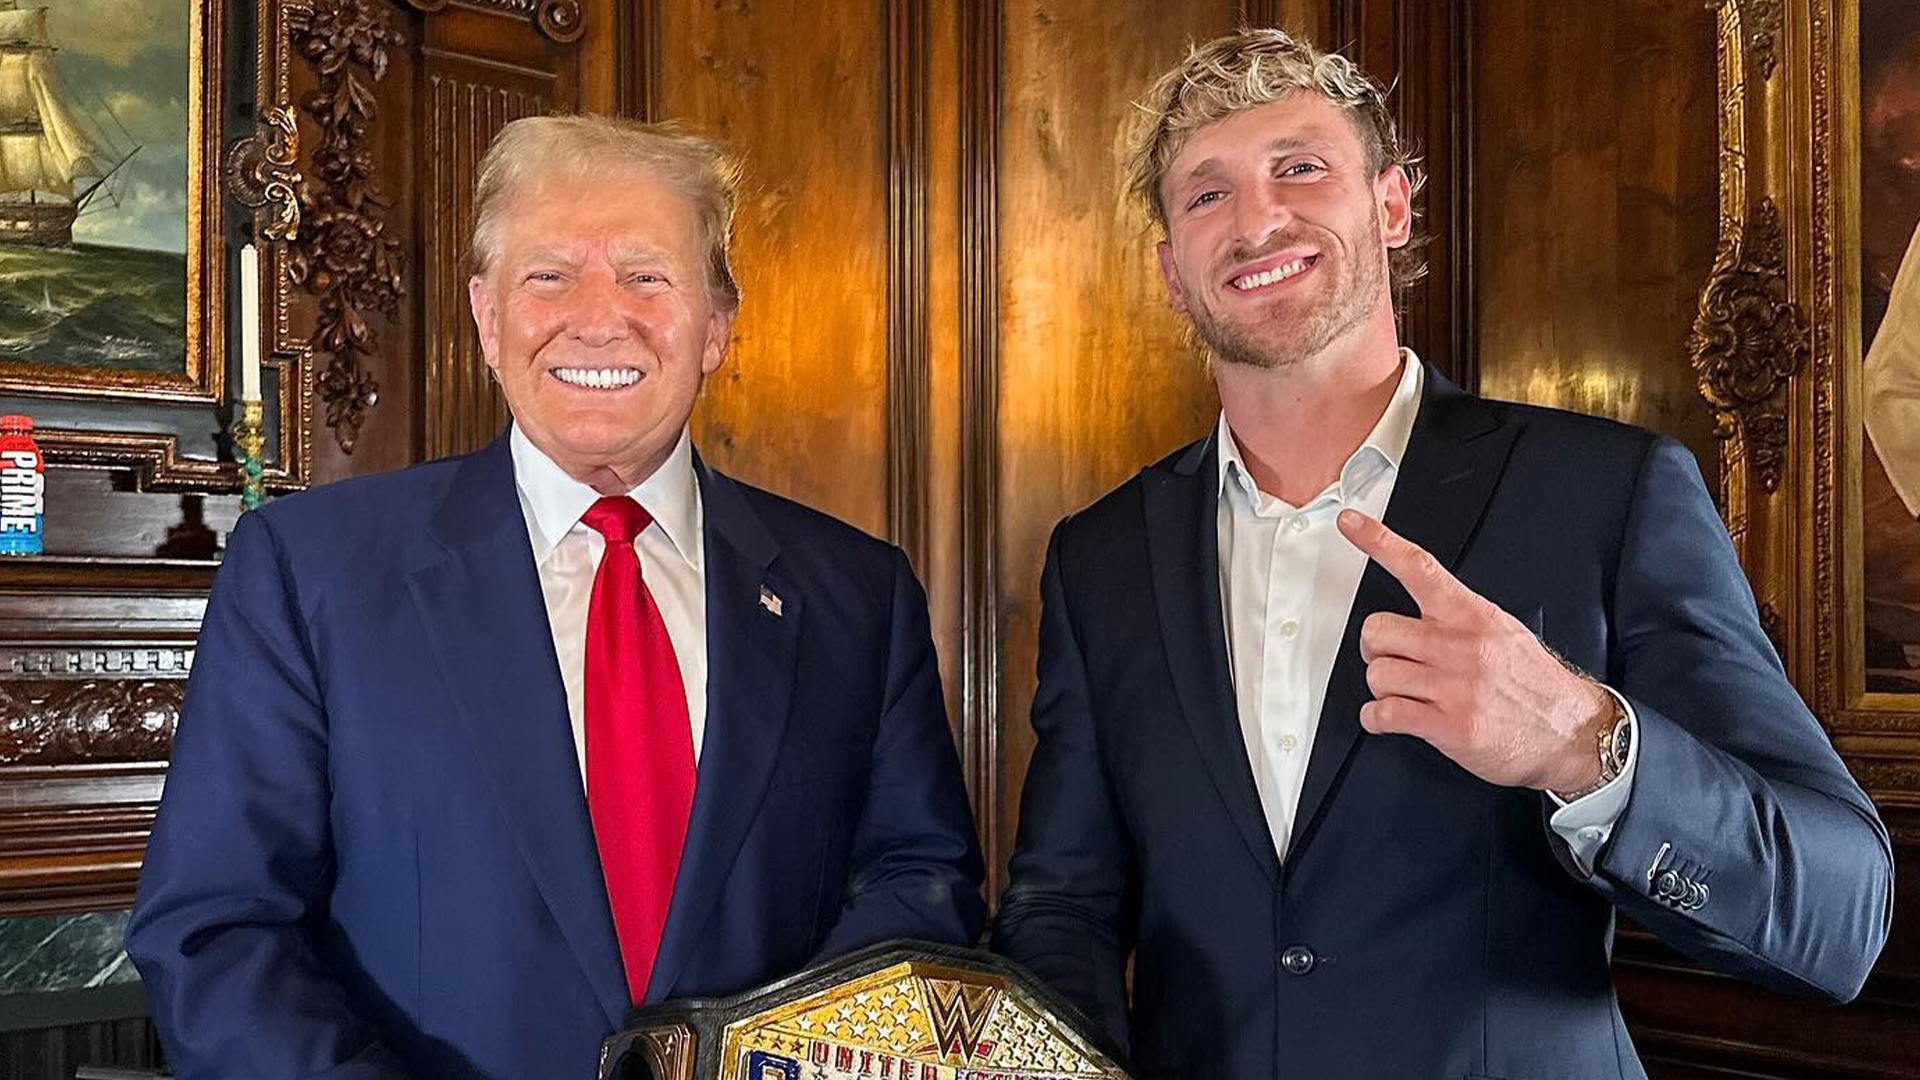 WWE star Logan Paul grins with Donald Trump at Mar-a-Lago after interviewing former president for Impaulsive podcast [Video]